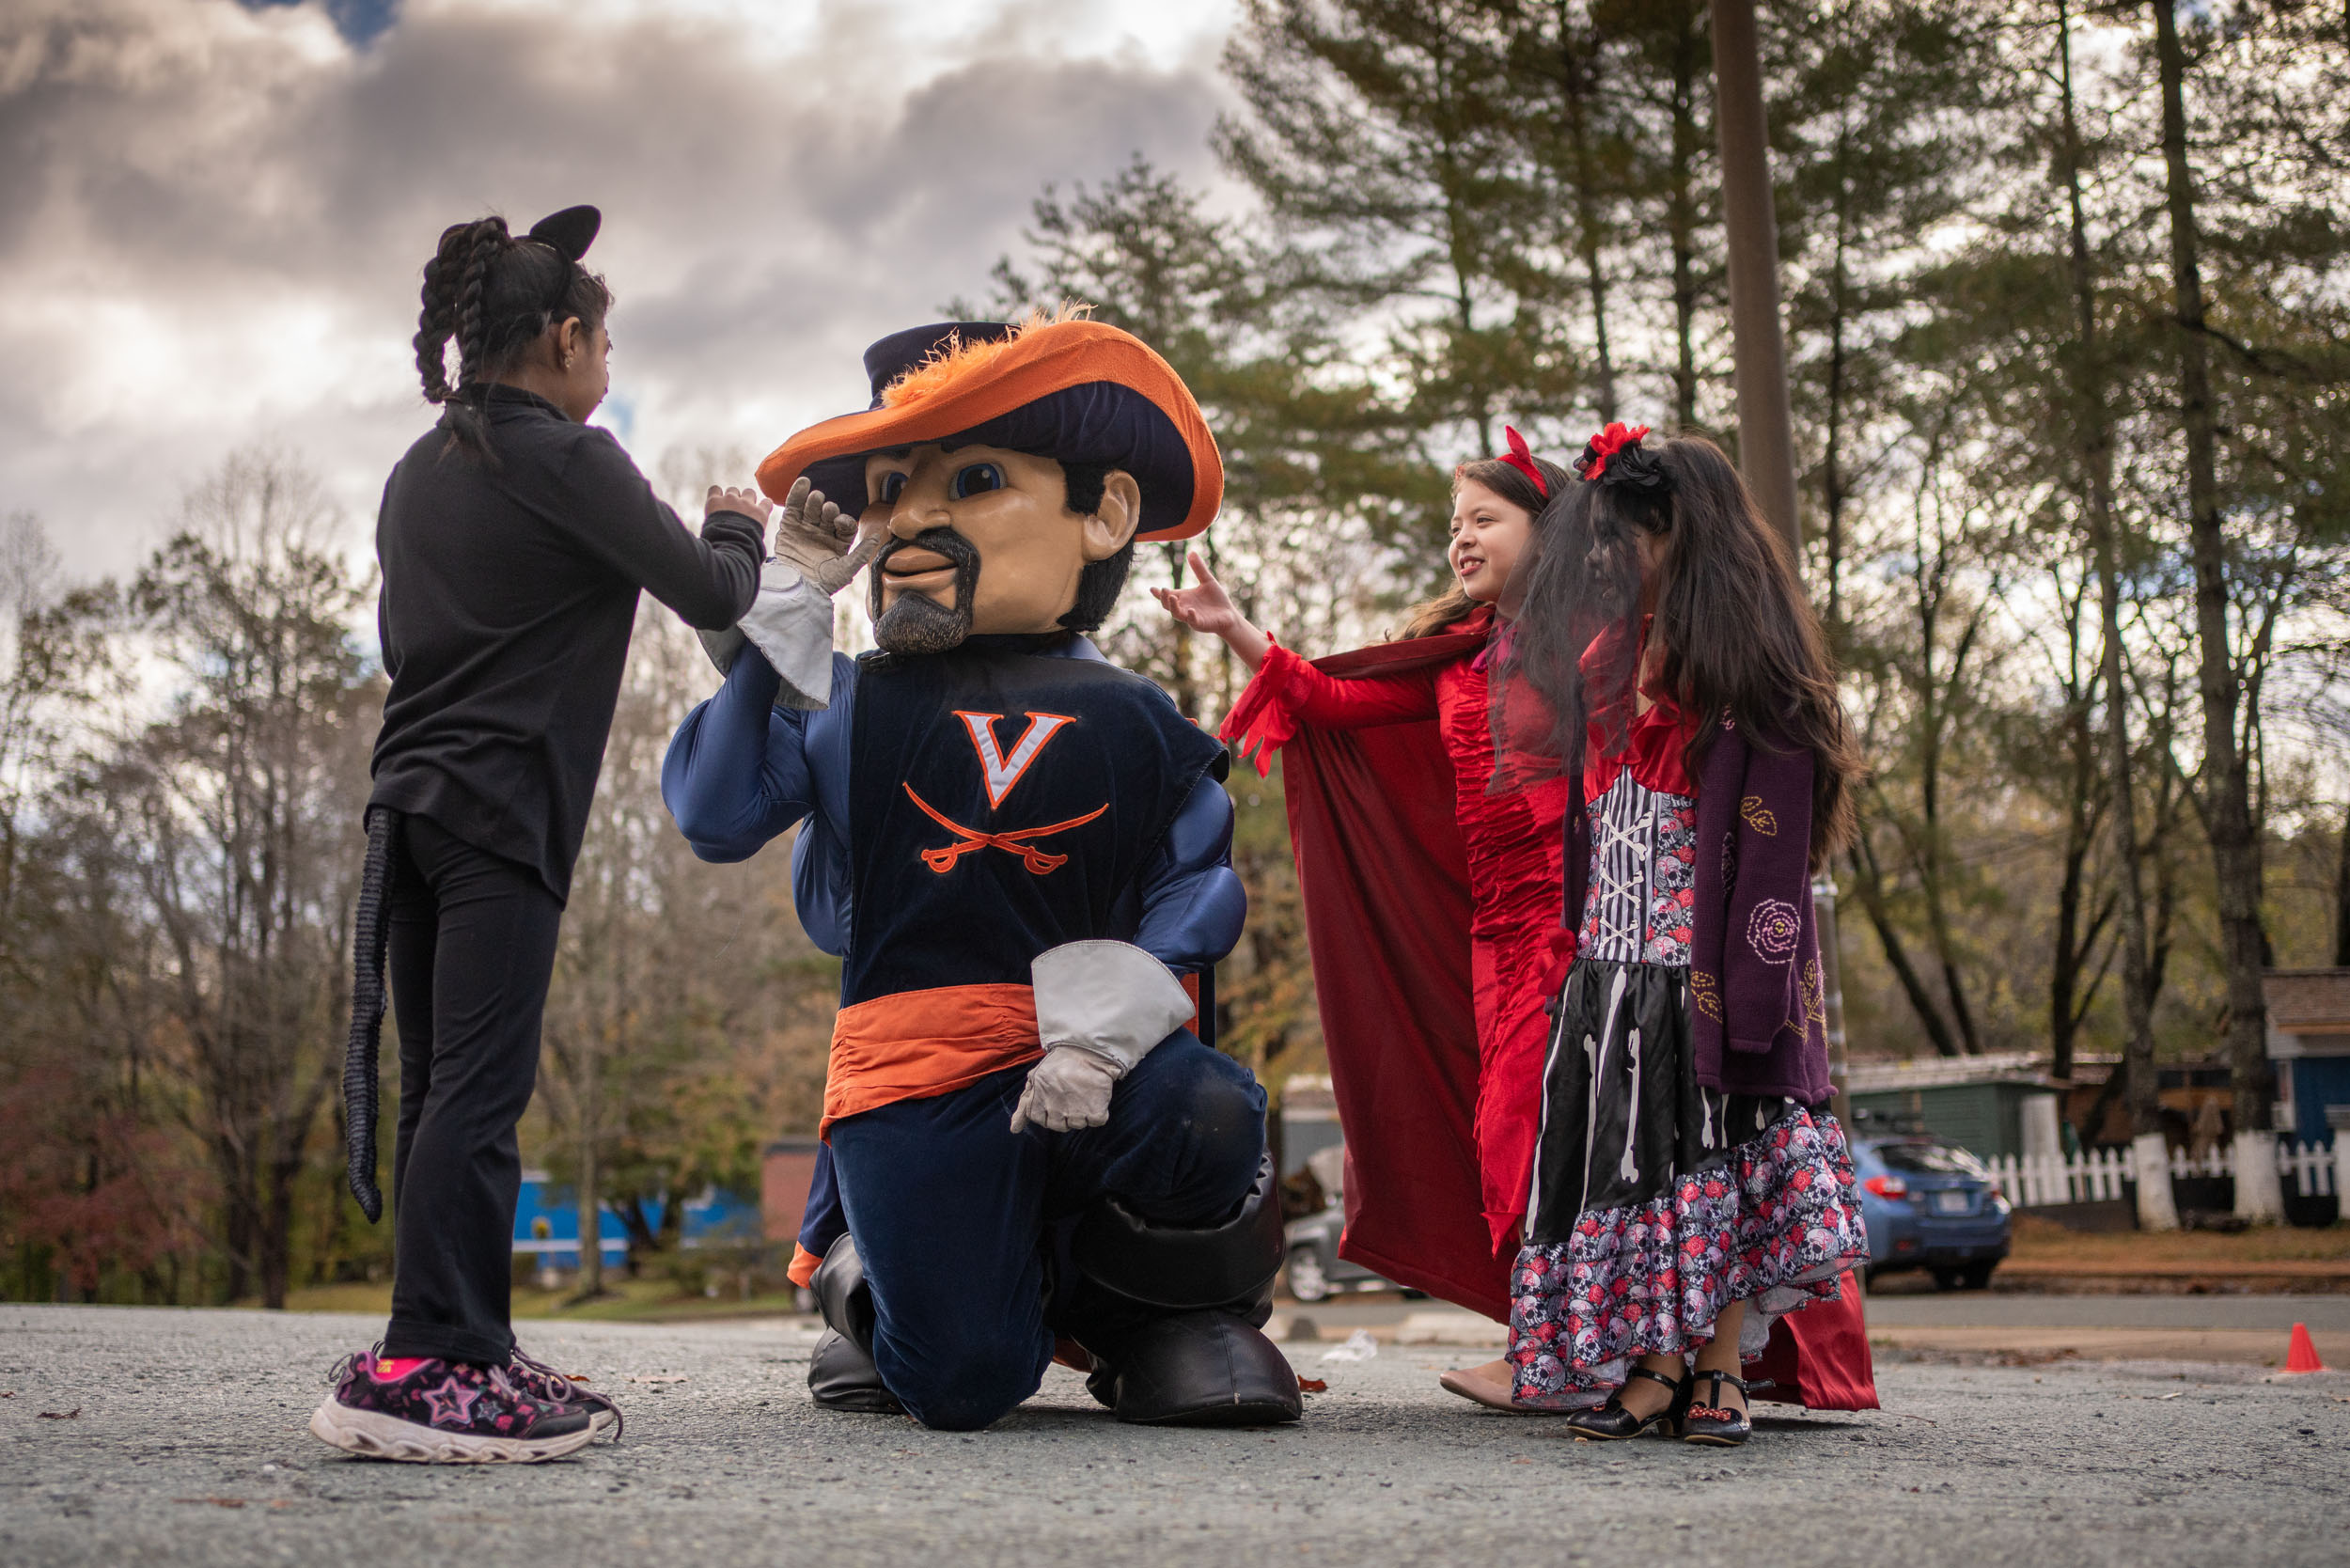 Cav Man kneeling to interact with three little girls dressed up for halloween